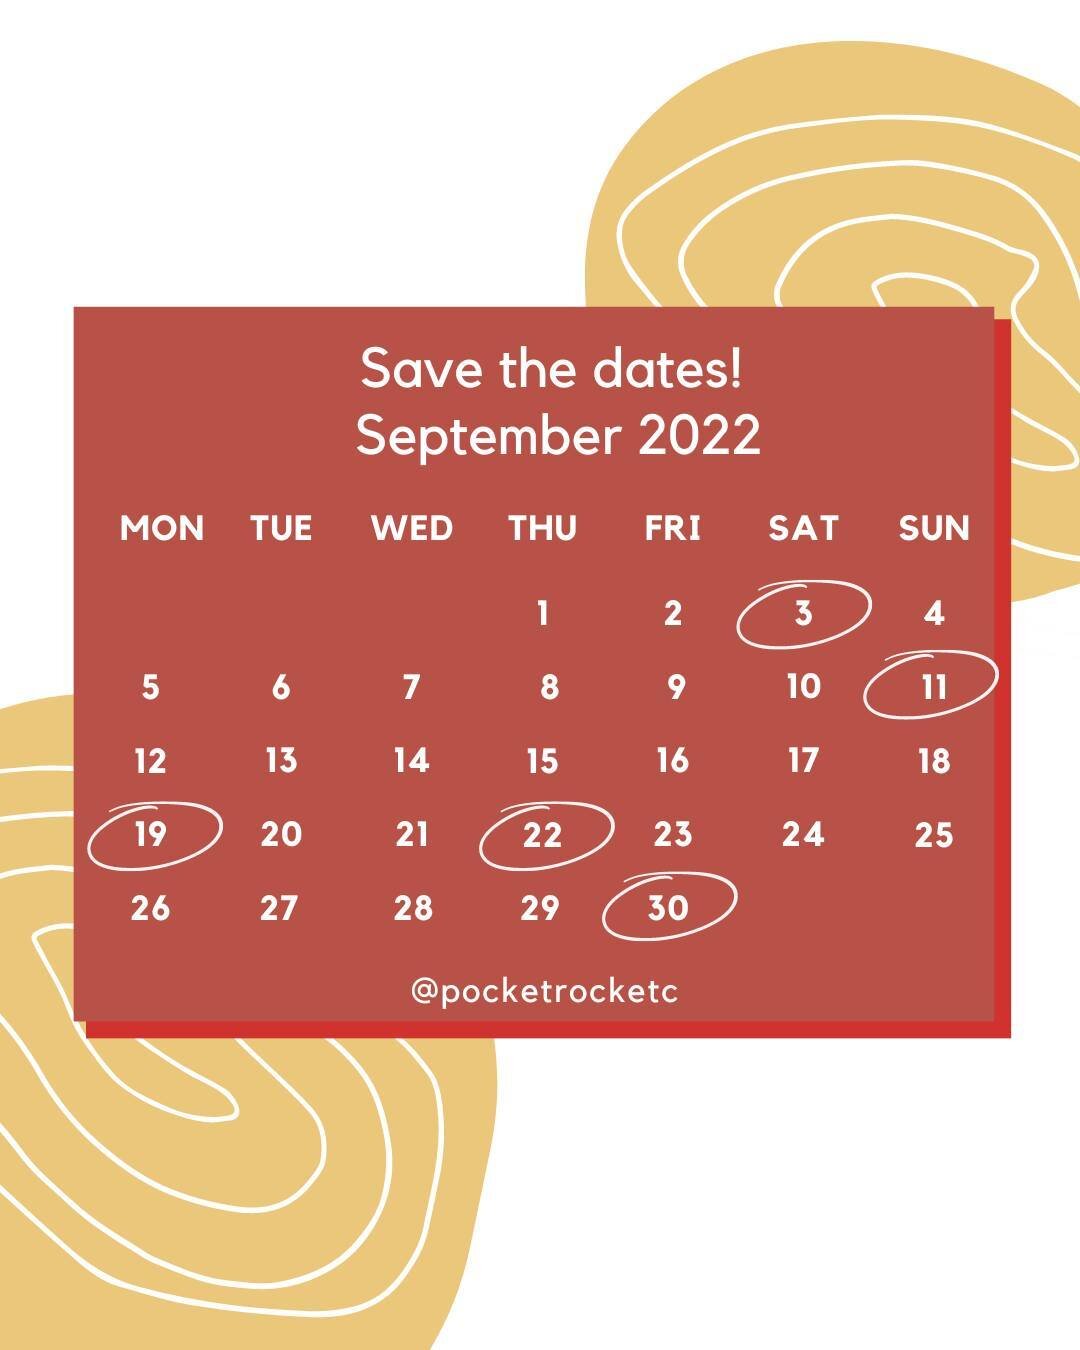 Planning your content for September? We've got you covered with this list of useful awareness days and events 👇 

Don't forget to save this post so you can refer back to it easily when you are creating content. Let us know in the comments of any oth